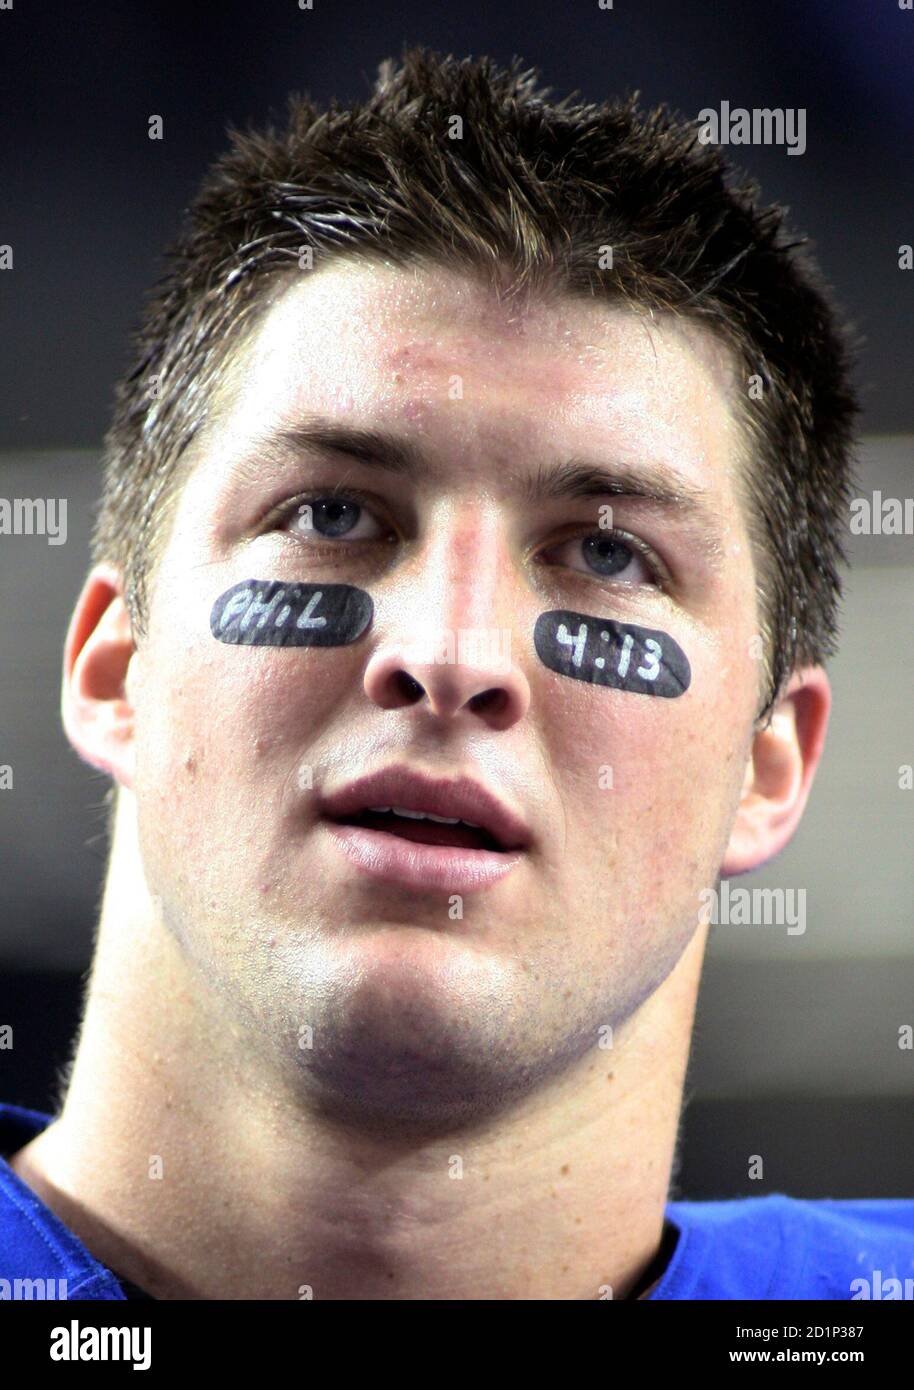 University of Florida quarterback Tim Tebow is pictured after winning  the NCAA Southeastern Conference title college football game against University of Alabama in Atlanta, Georgia December 6, 2008.     REUTERS/Tami Chappell (UNITED STATES) Stock Photo